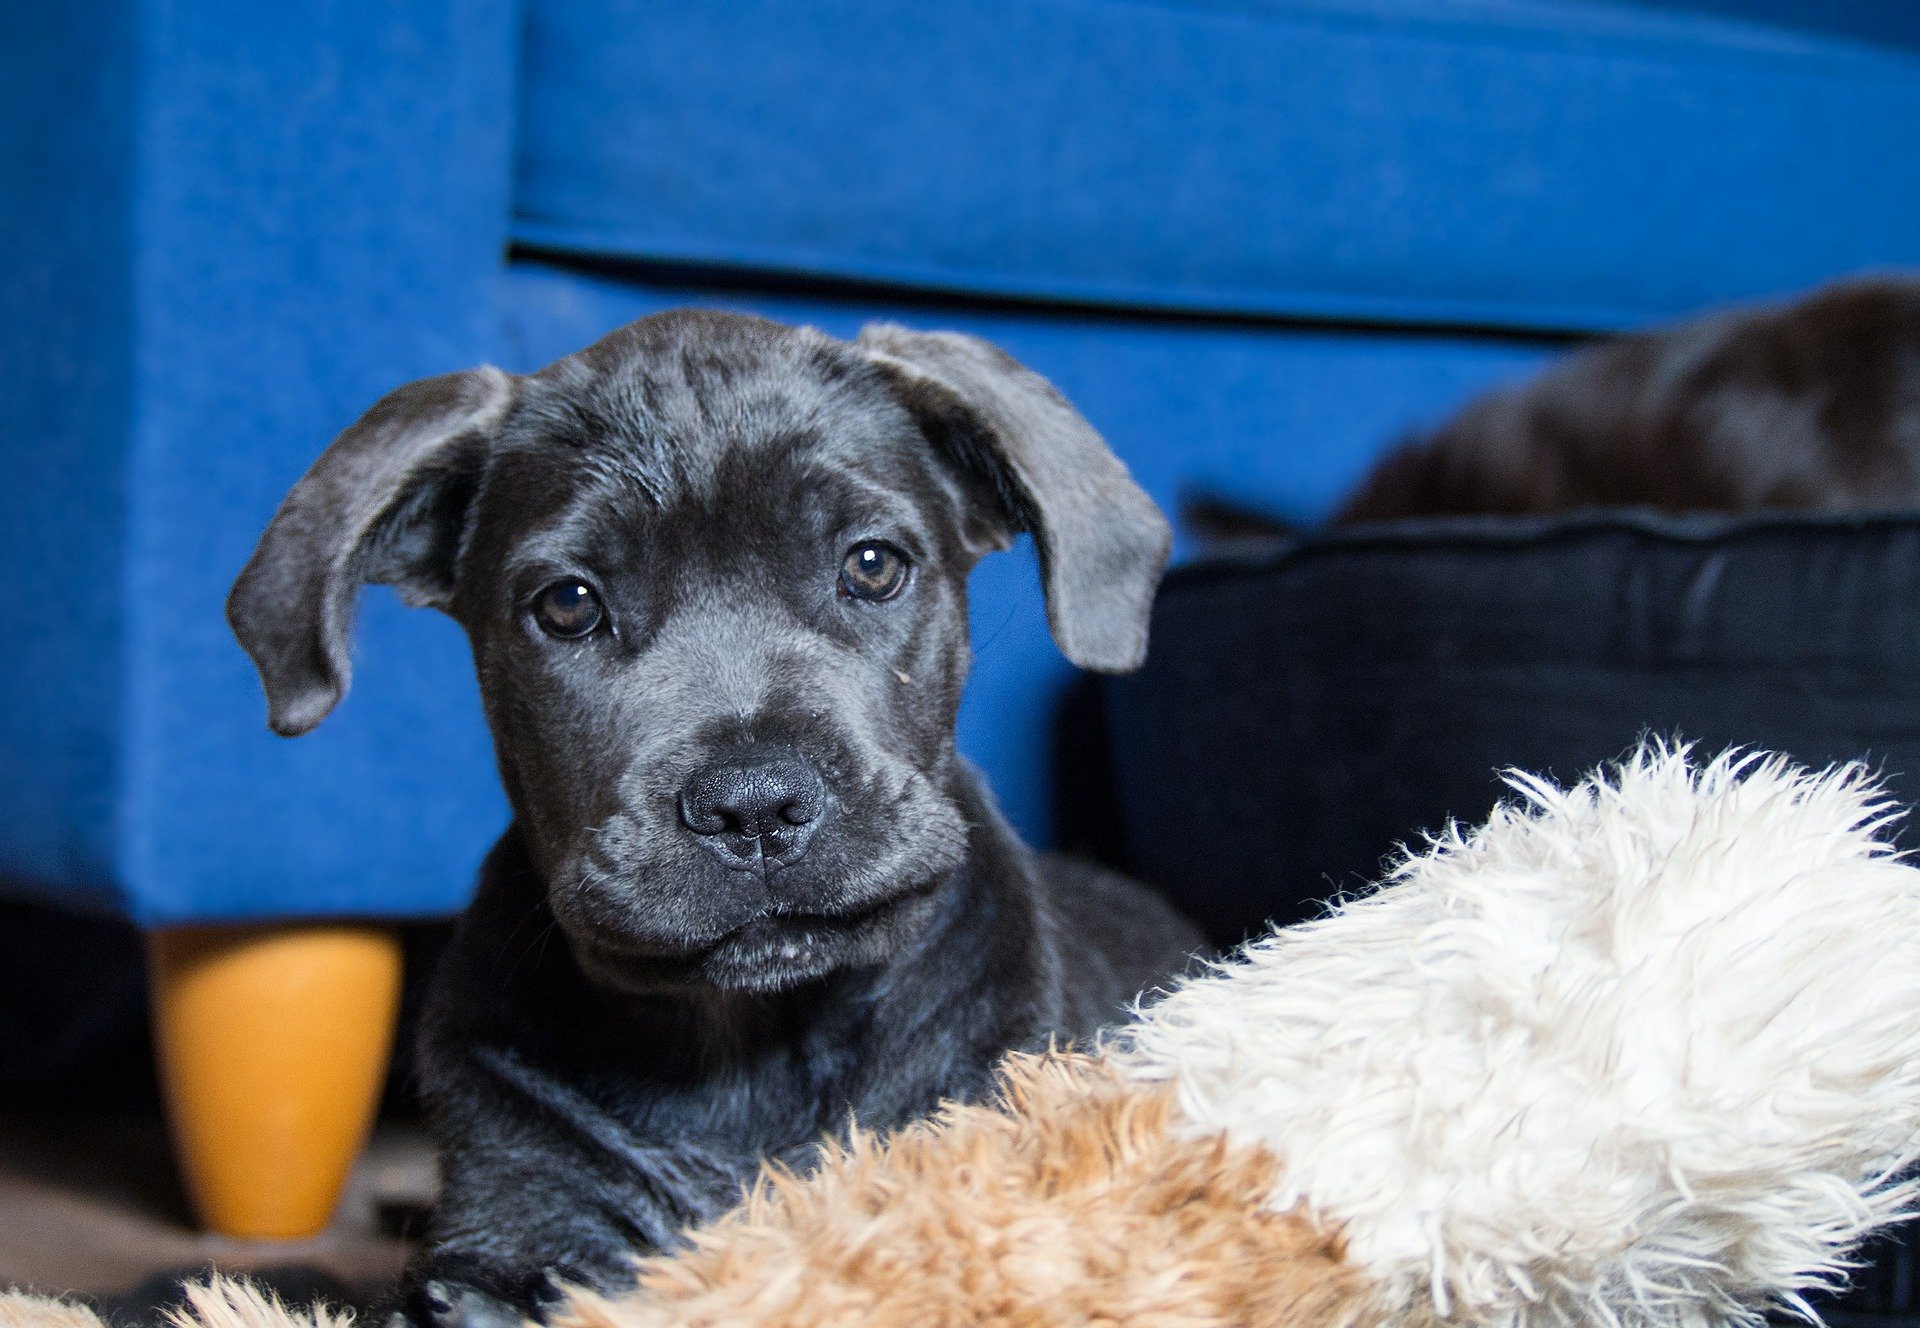 Cane Corso puppies: Taking care of them